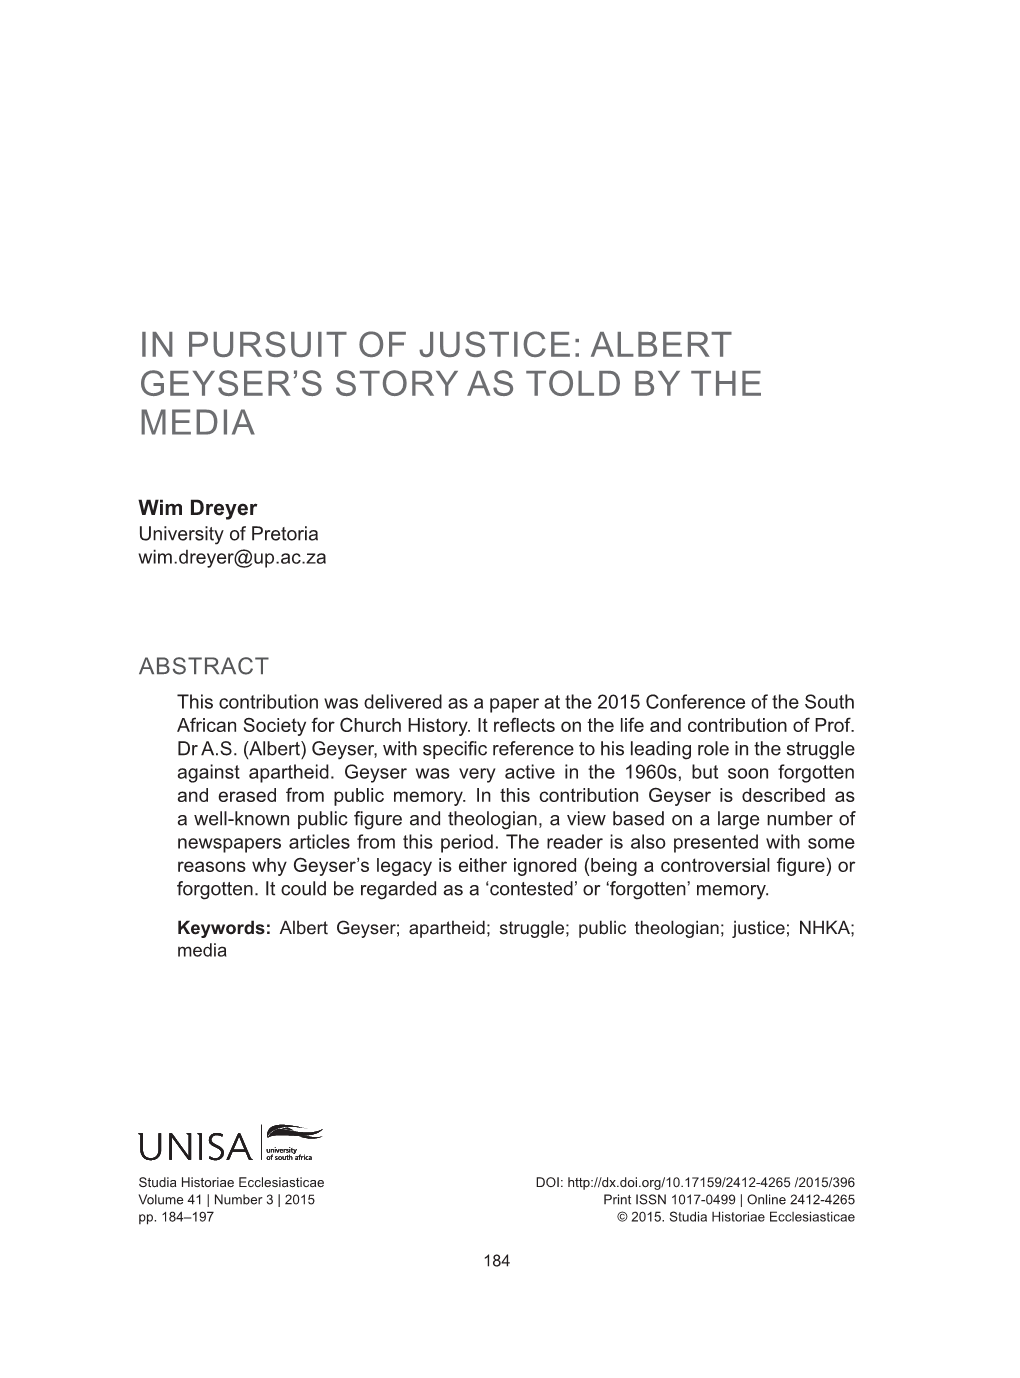 Albert Geyser's Story As Told by the Media